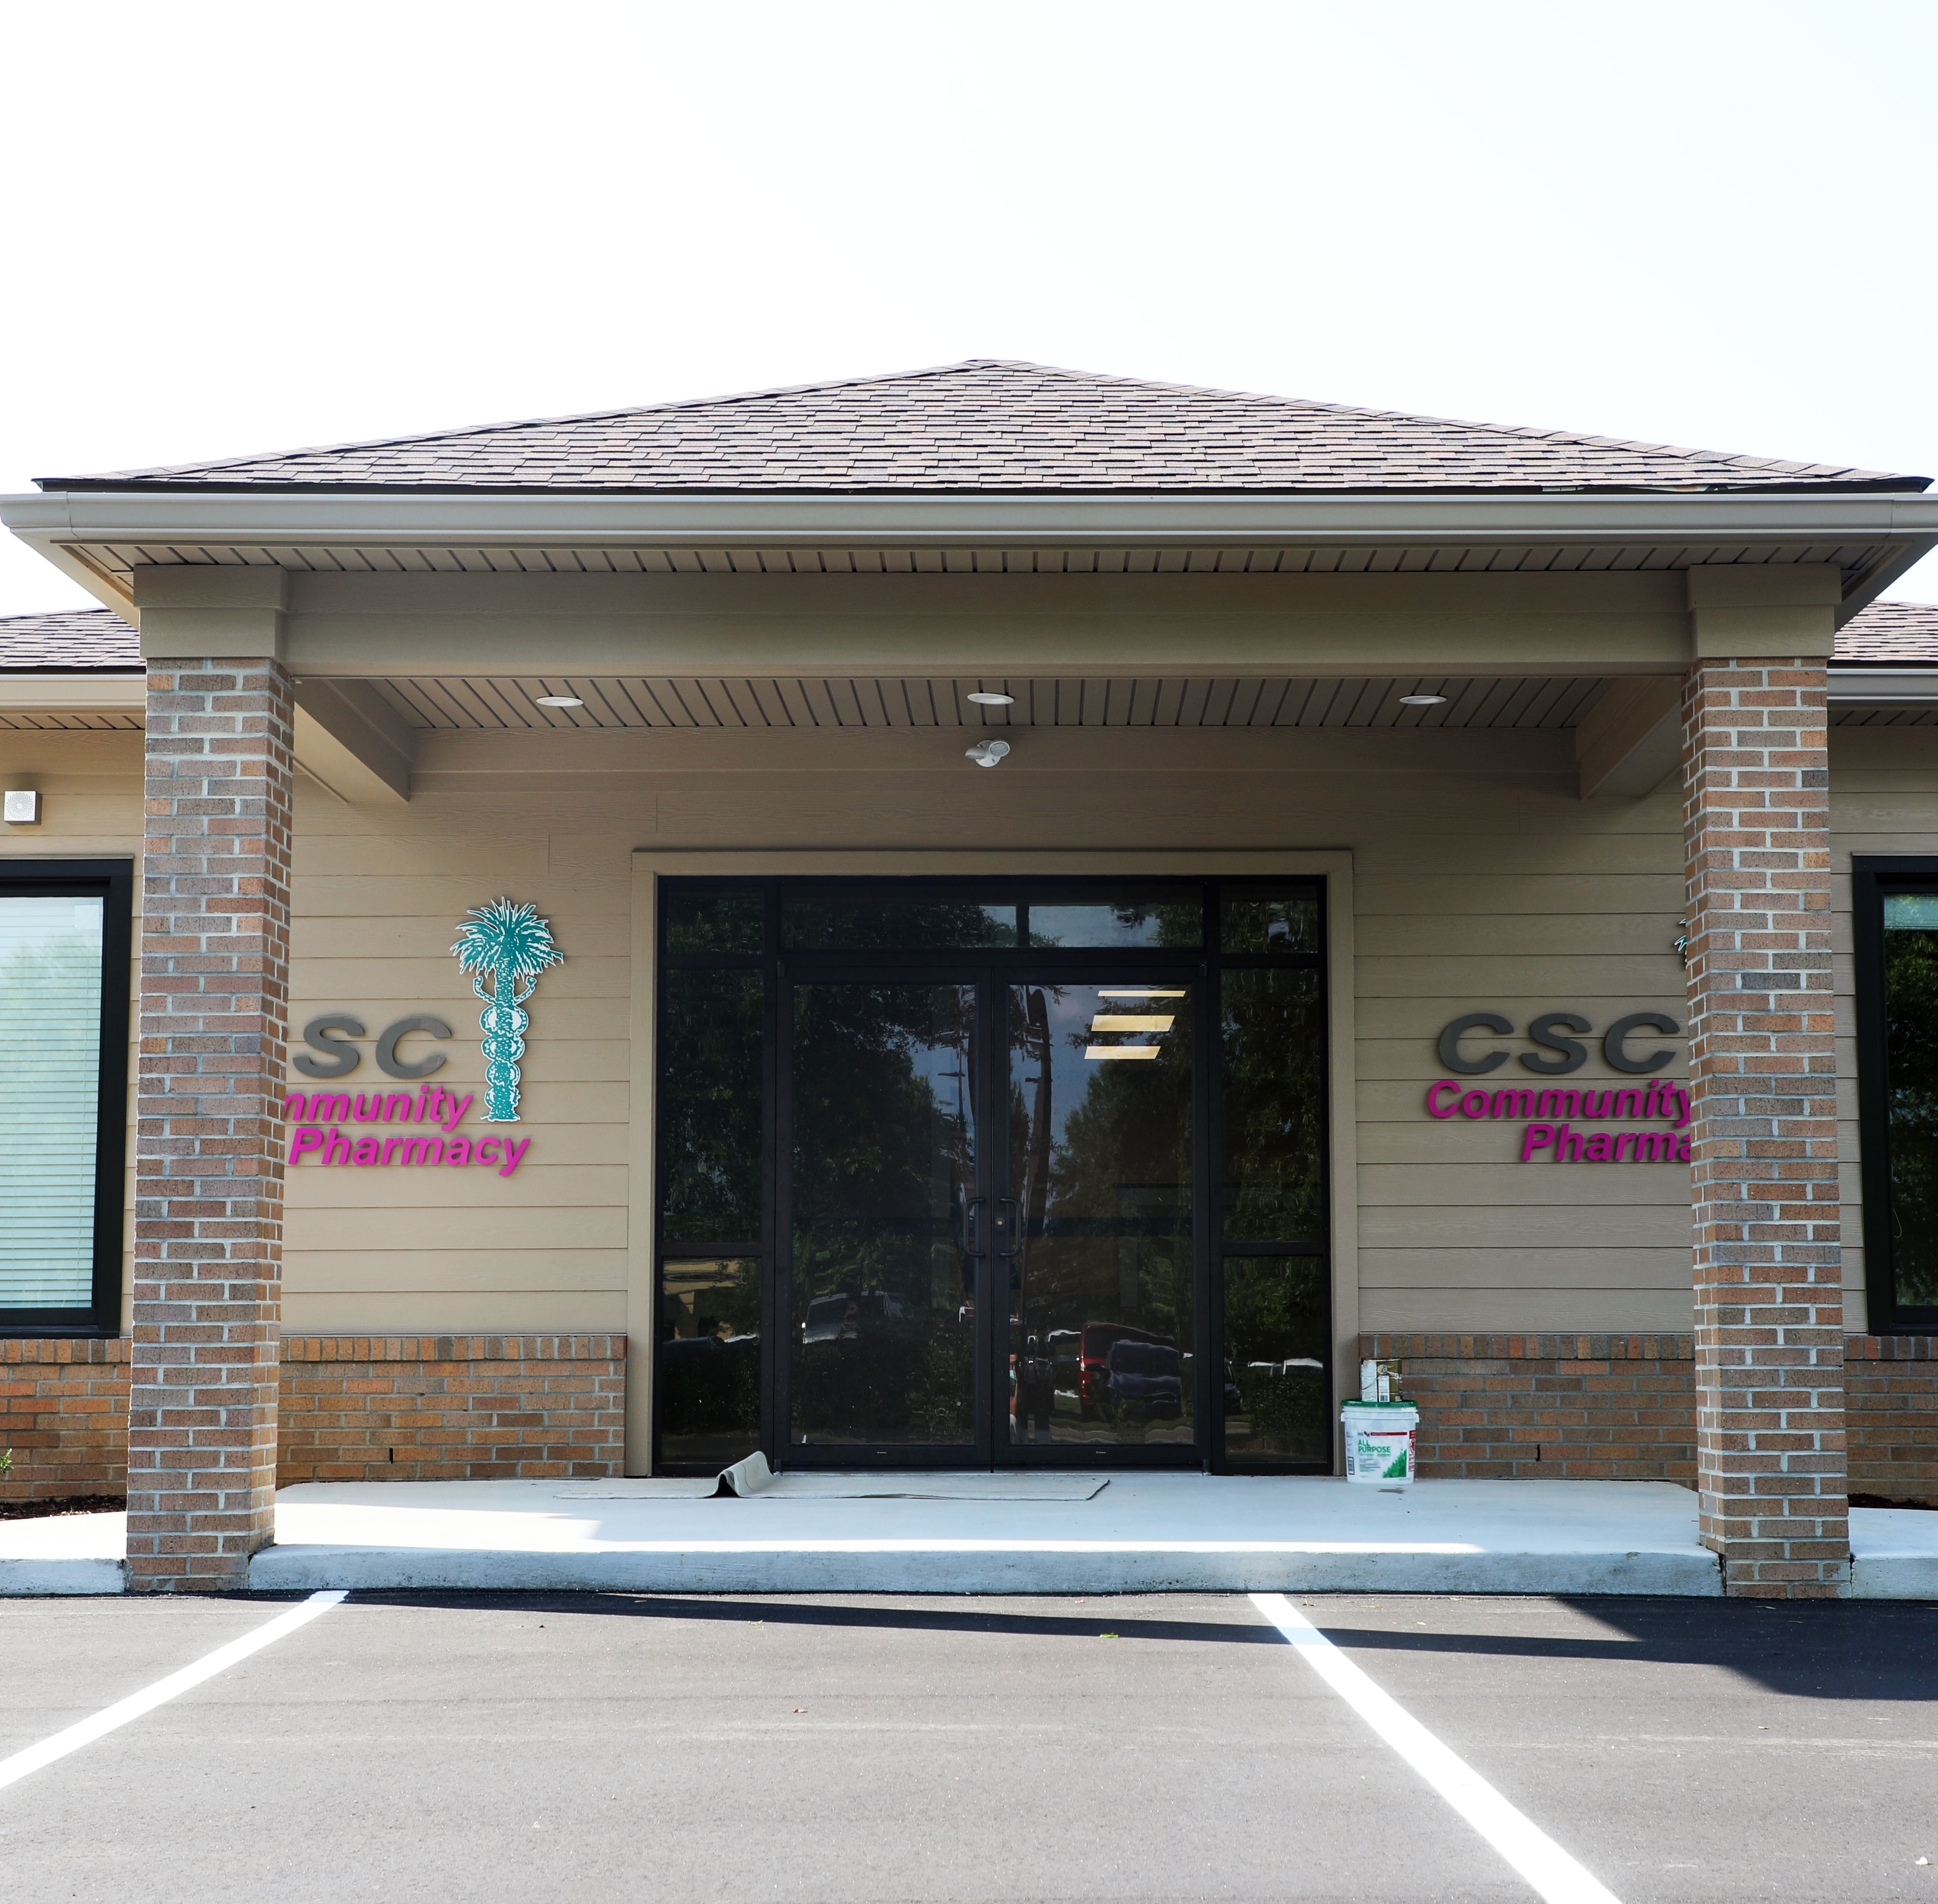 CSC Community Pharmacy set to move into new location in Hartsville